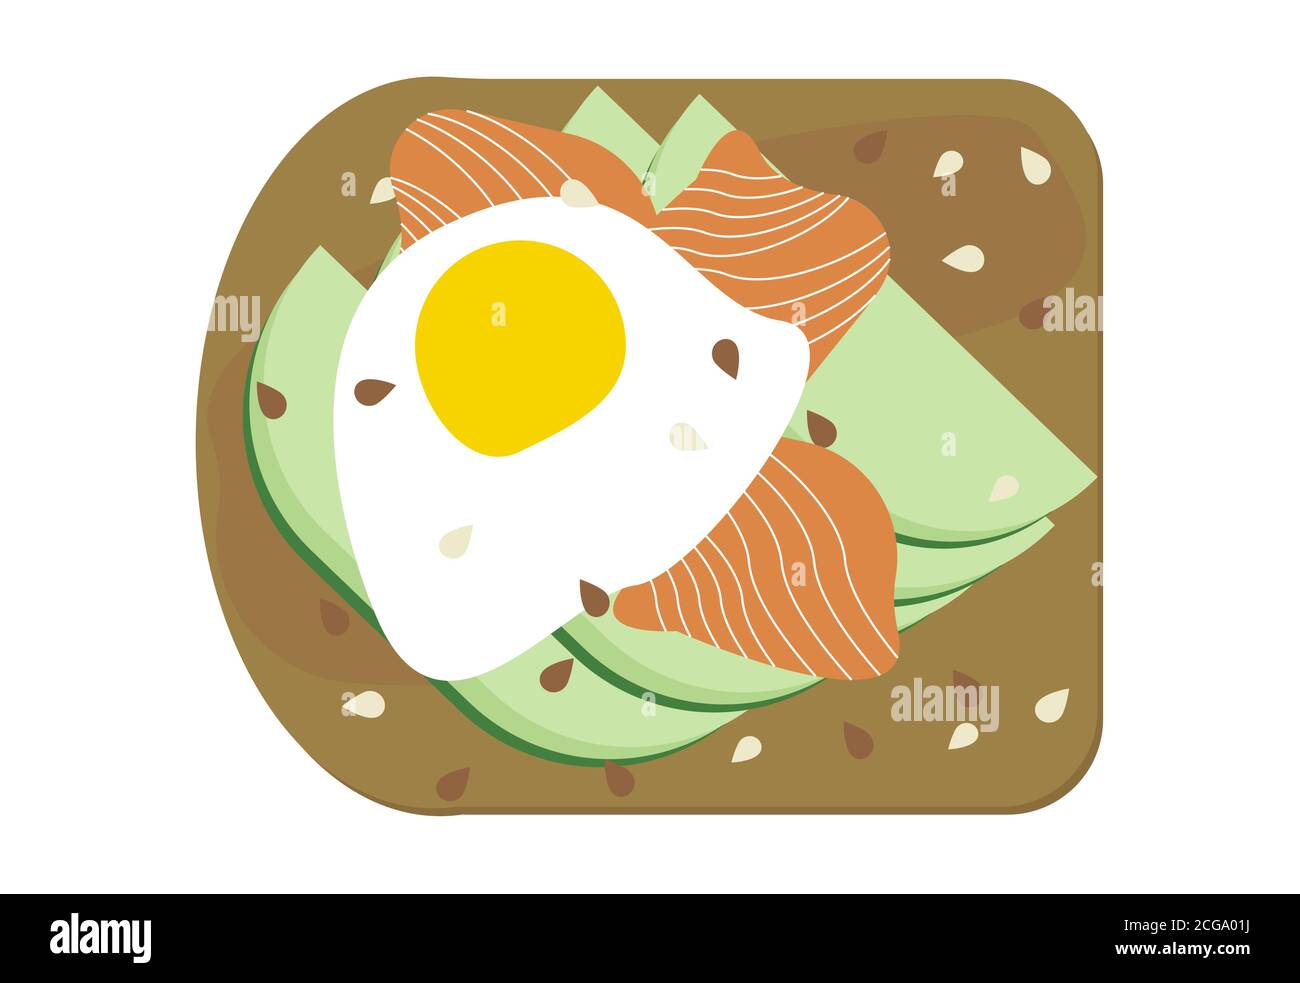 Avocado toast with poached egg and salmon illustration isolated. Avocado smoked lox slices on bread, vegan sandwich with seeds Stock Vector